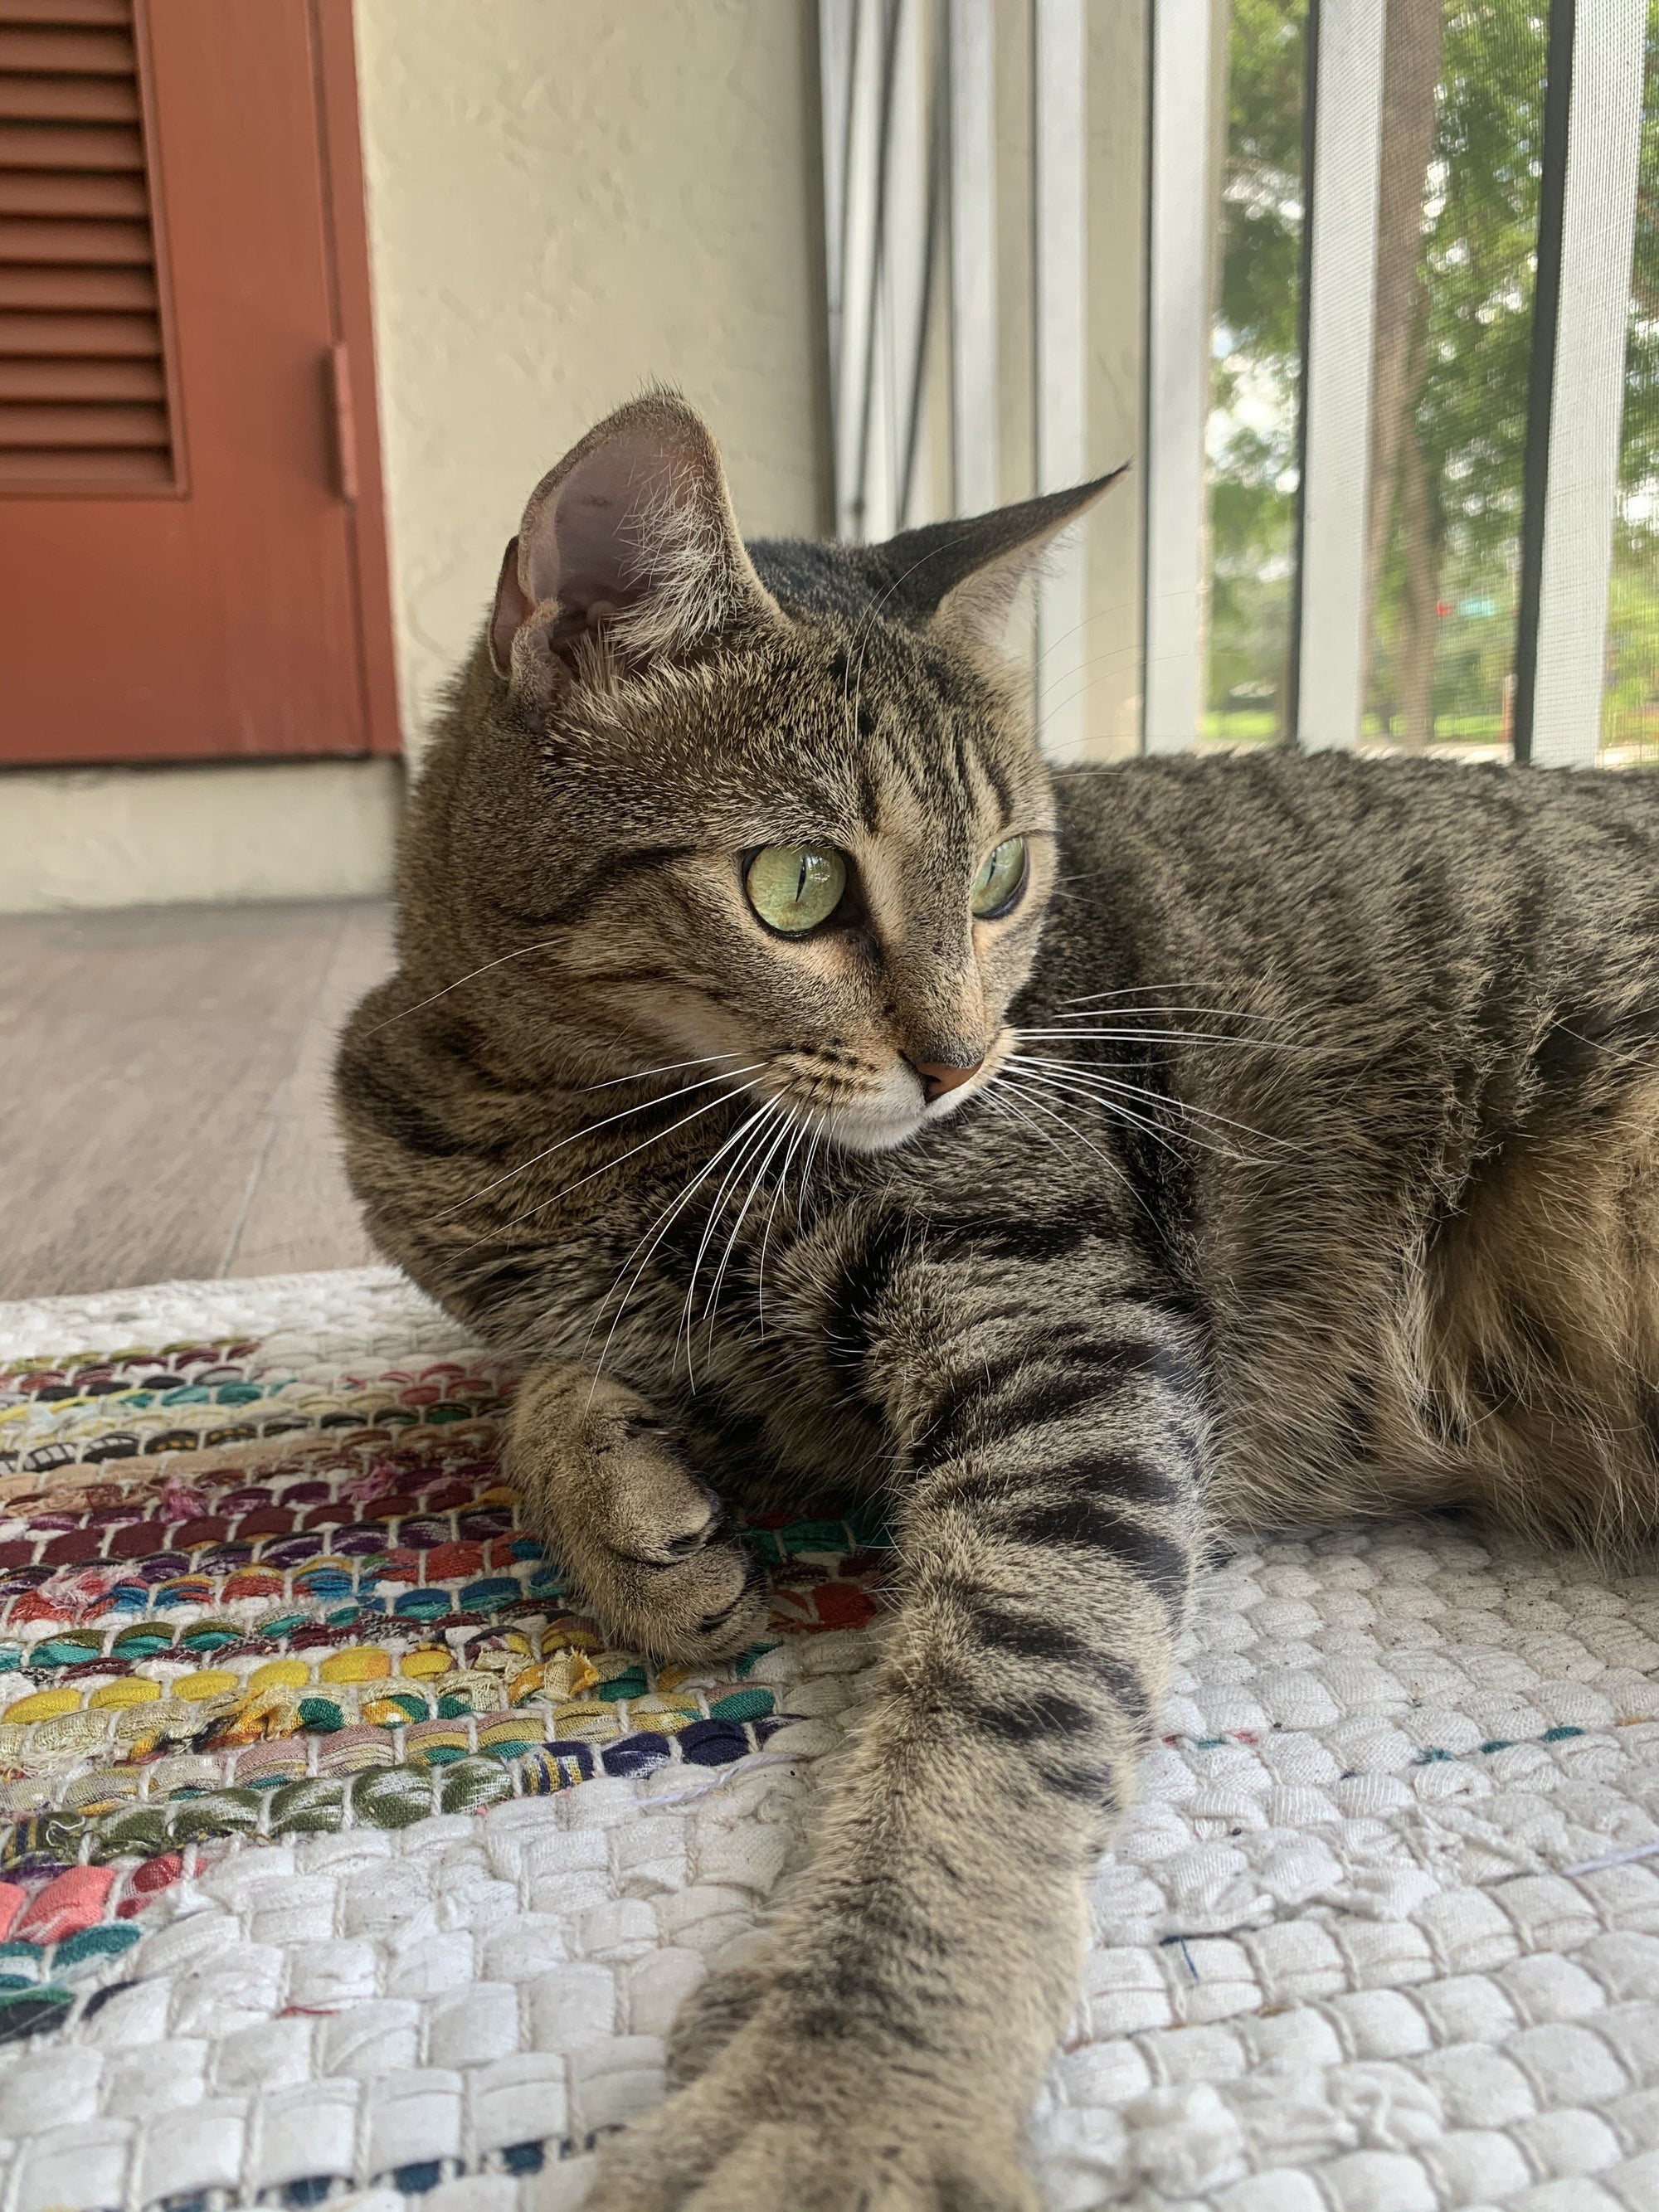 August Cool Cat of the Month: Meet Dixie!